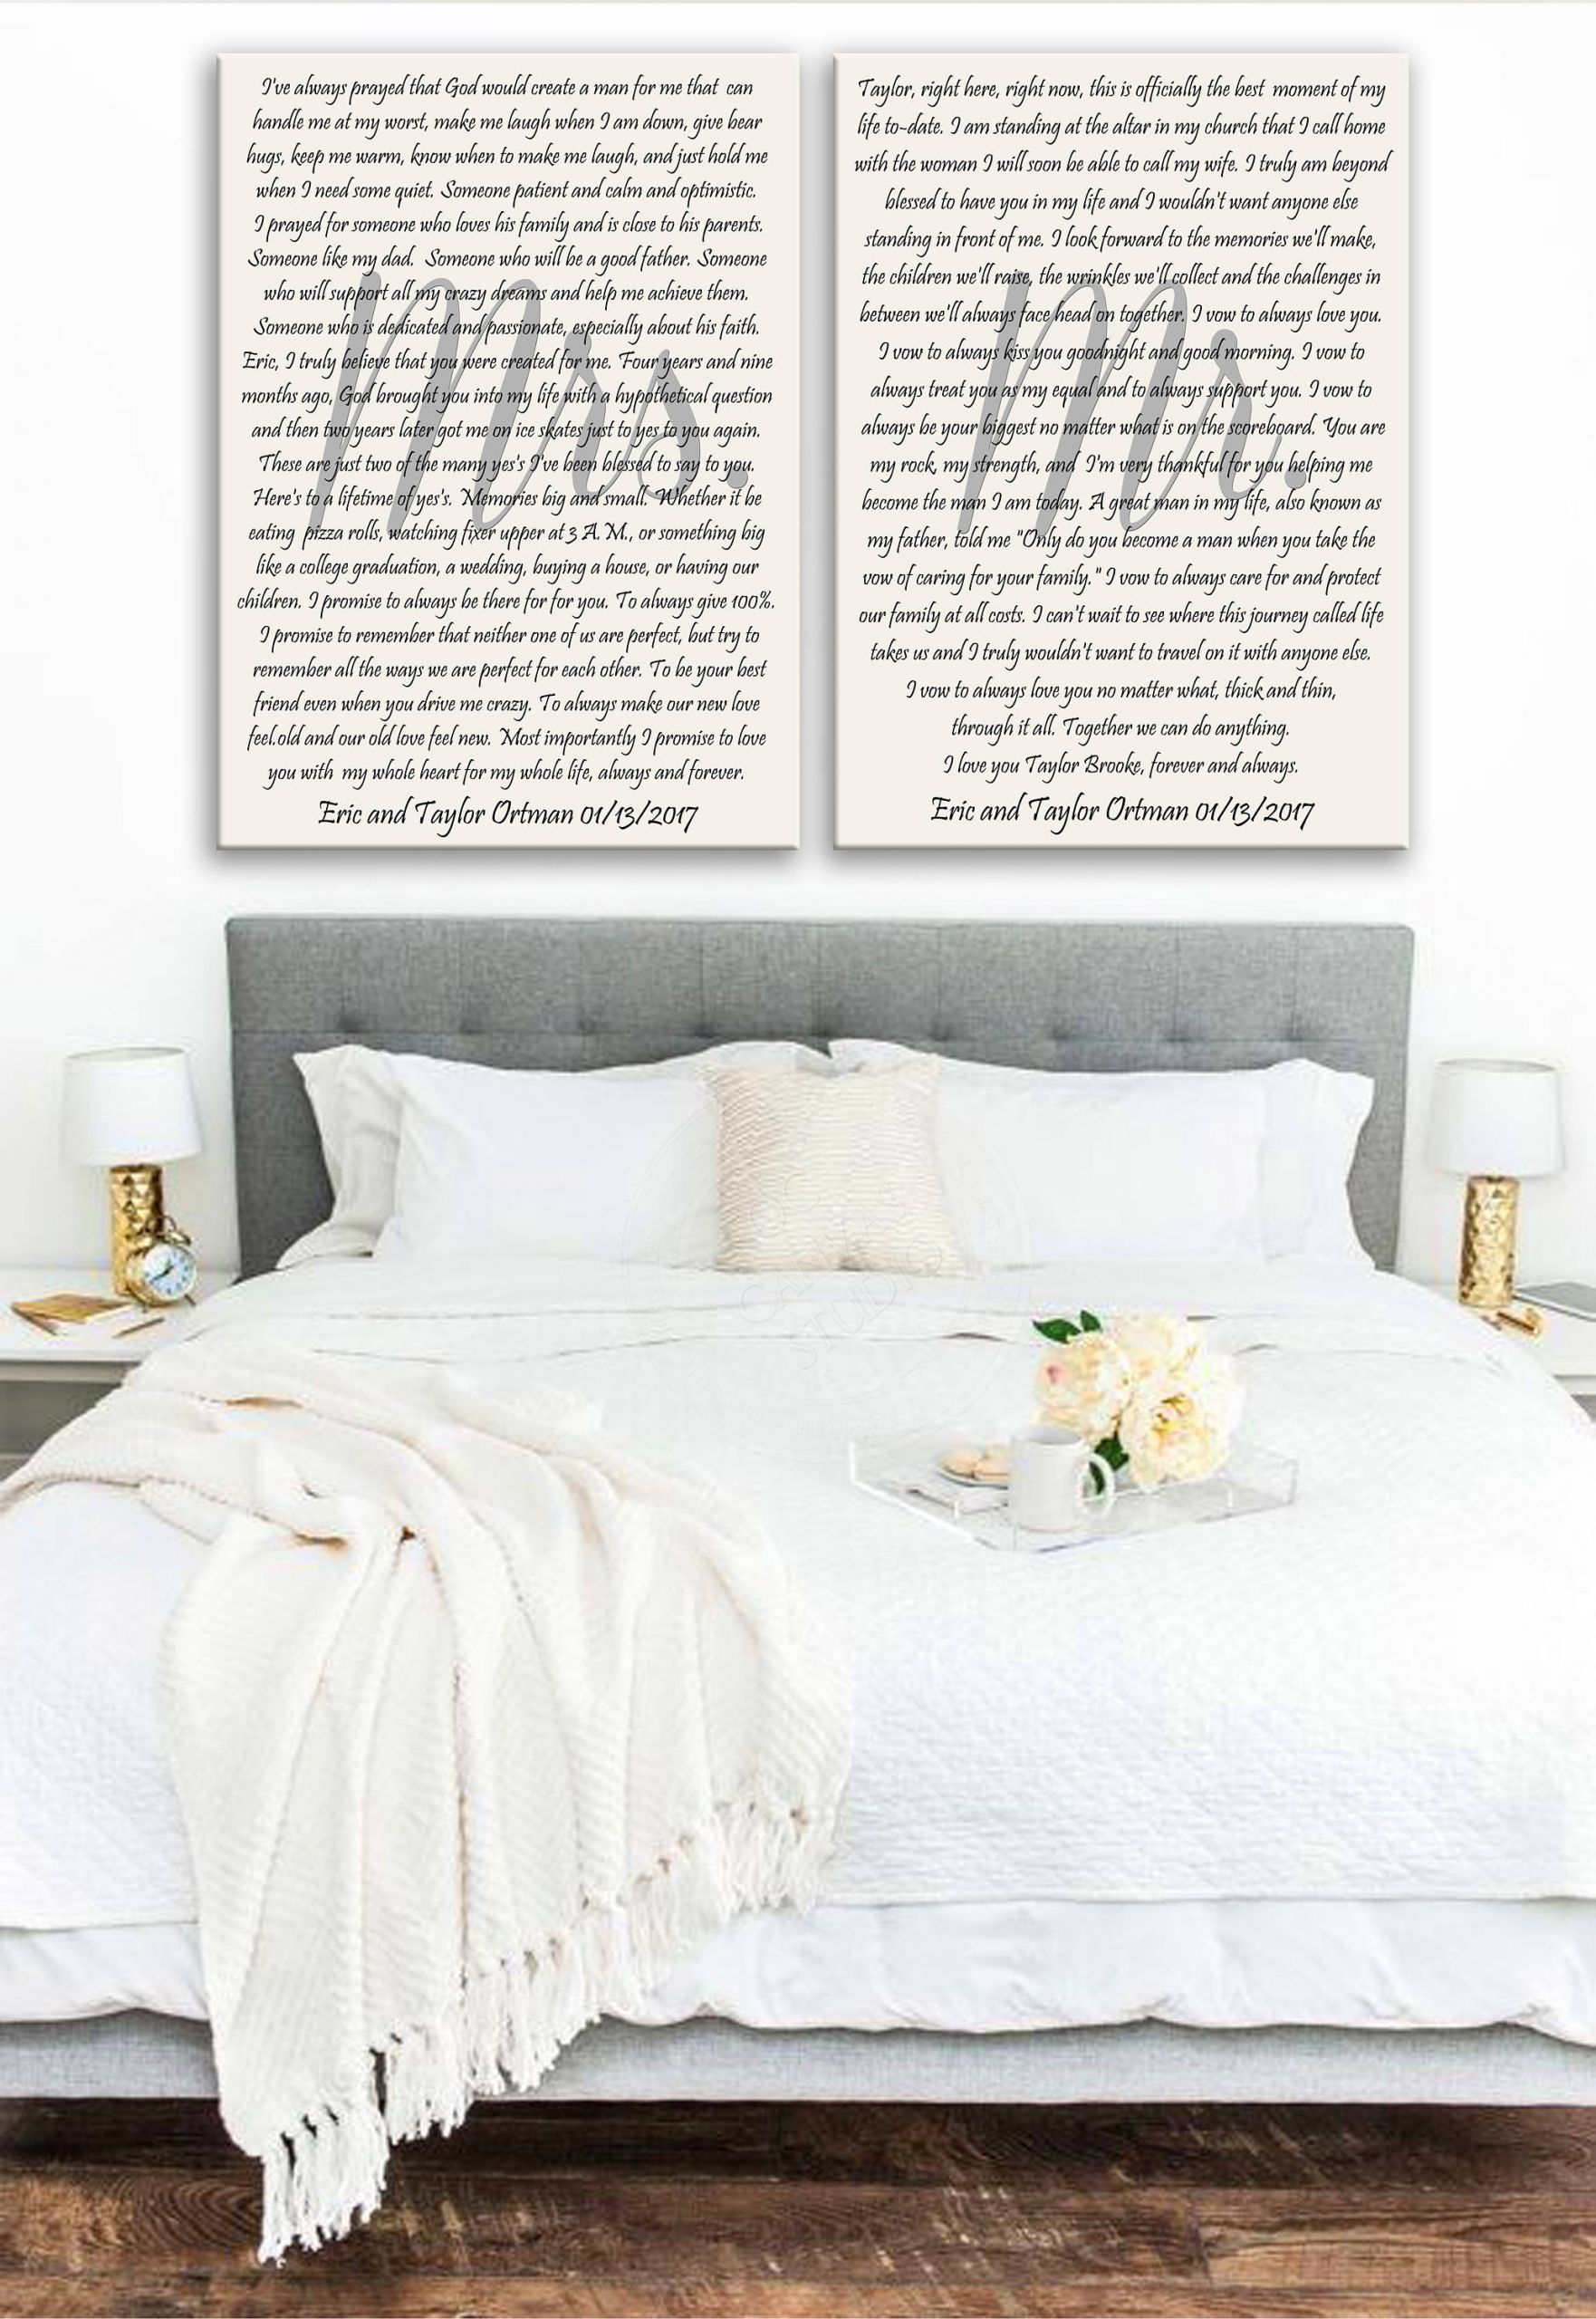 Wedding Vows On Canvas
 Wedding Vows Canvas His and Hers Vows Wedding Vows Art Mrs